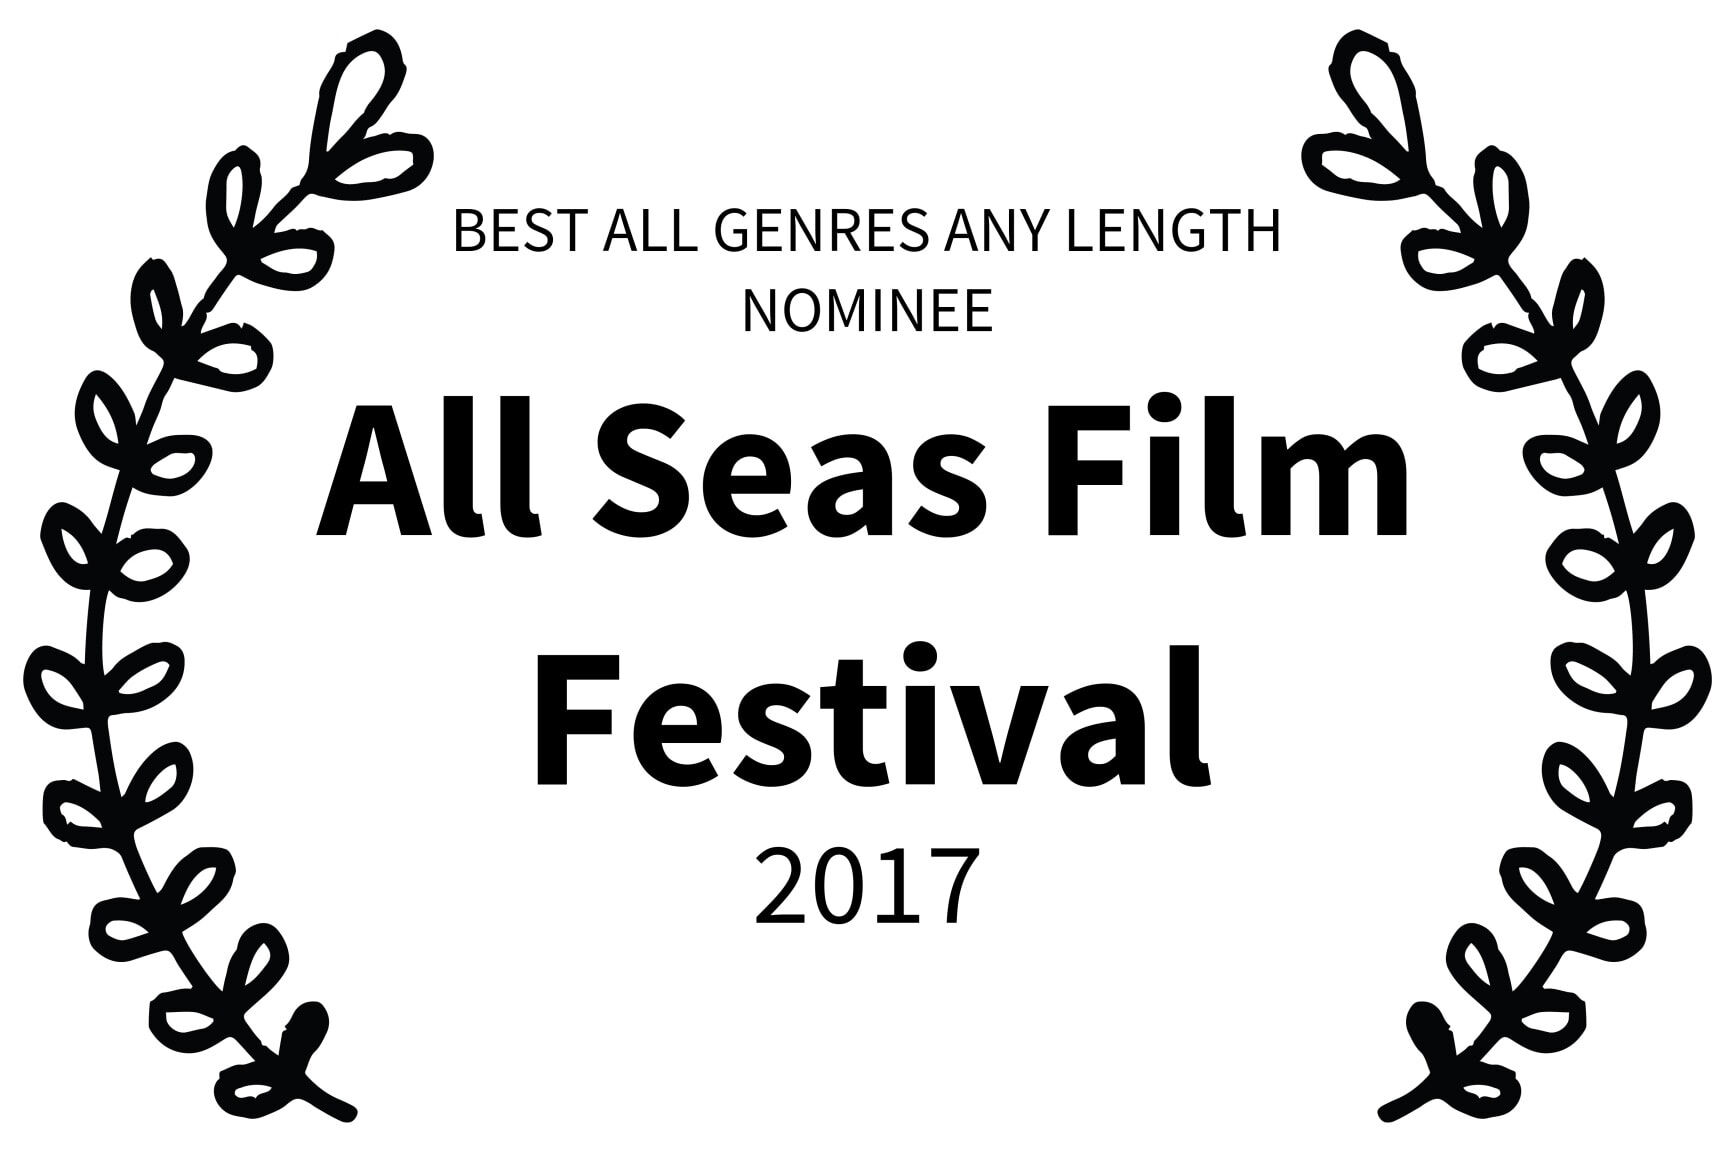 BEST ALL GENRES ANY LENGTH NOMINEE - All Seas Film Festival - 2017